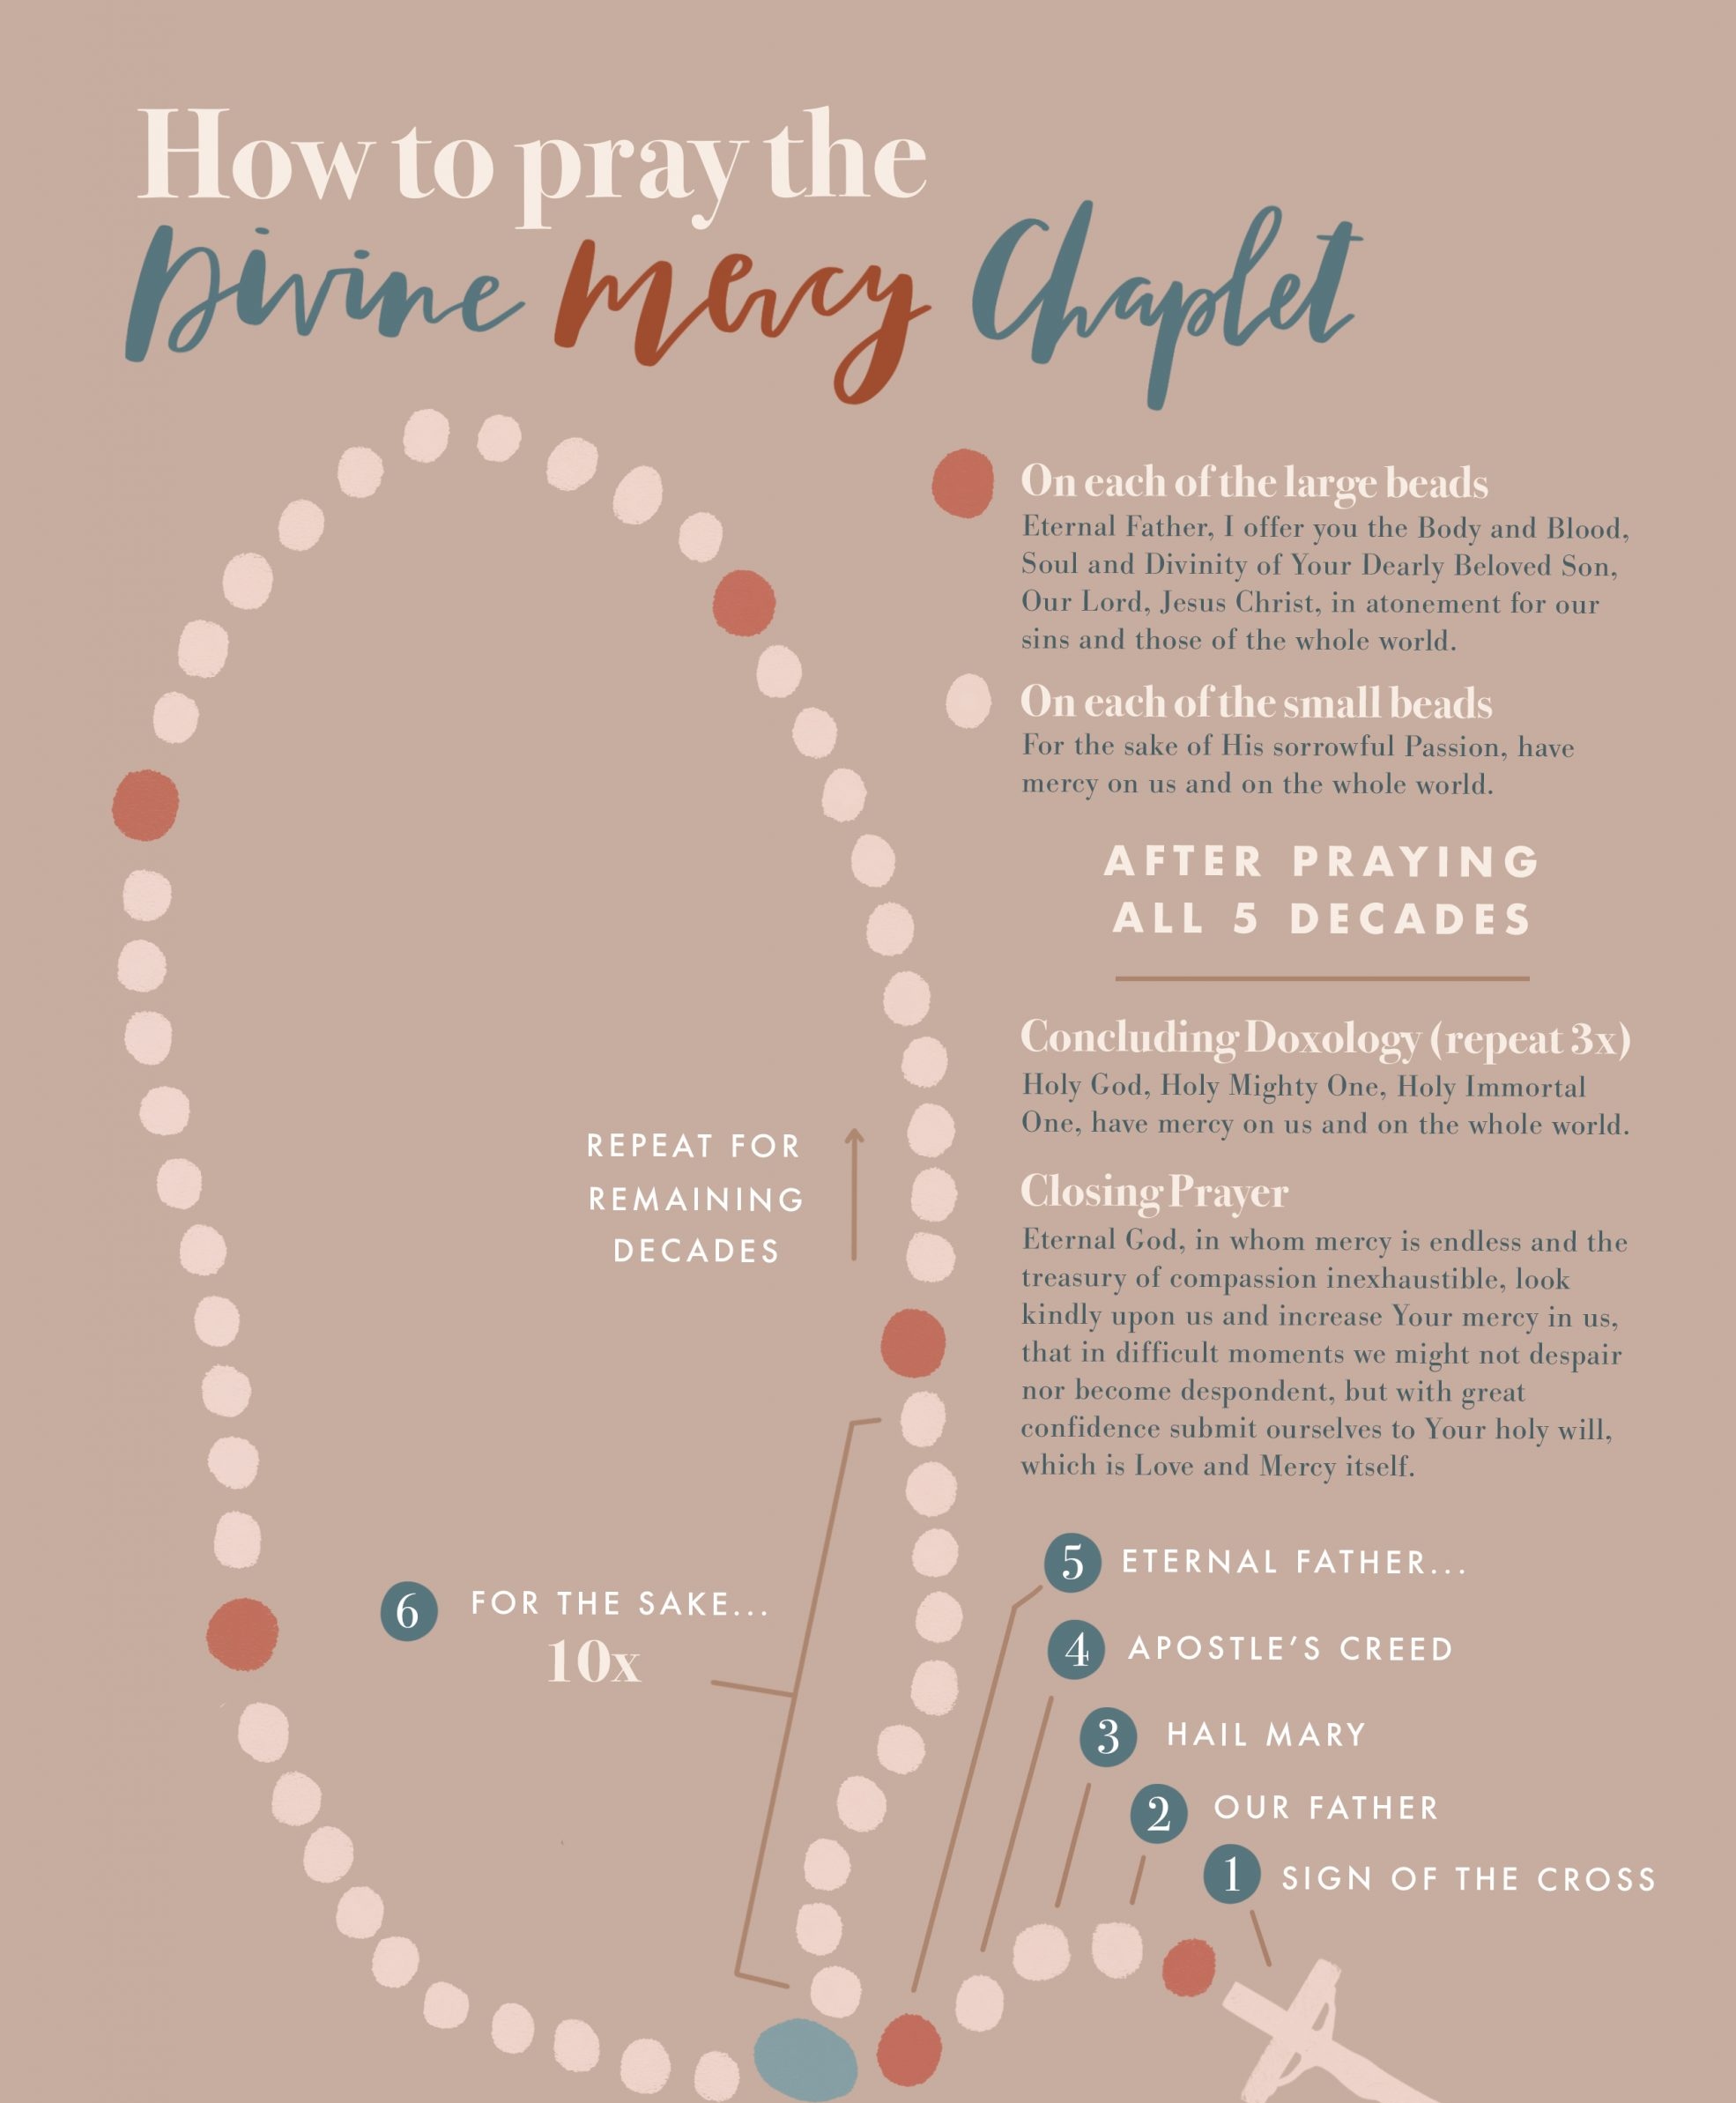 How To Recite The Prayers For The Chaplet Of Divine Mercy?